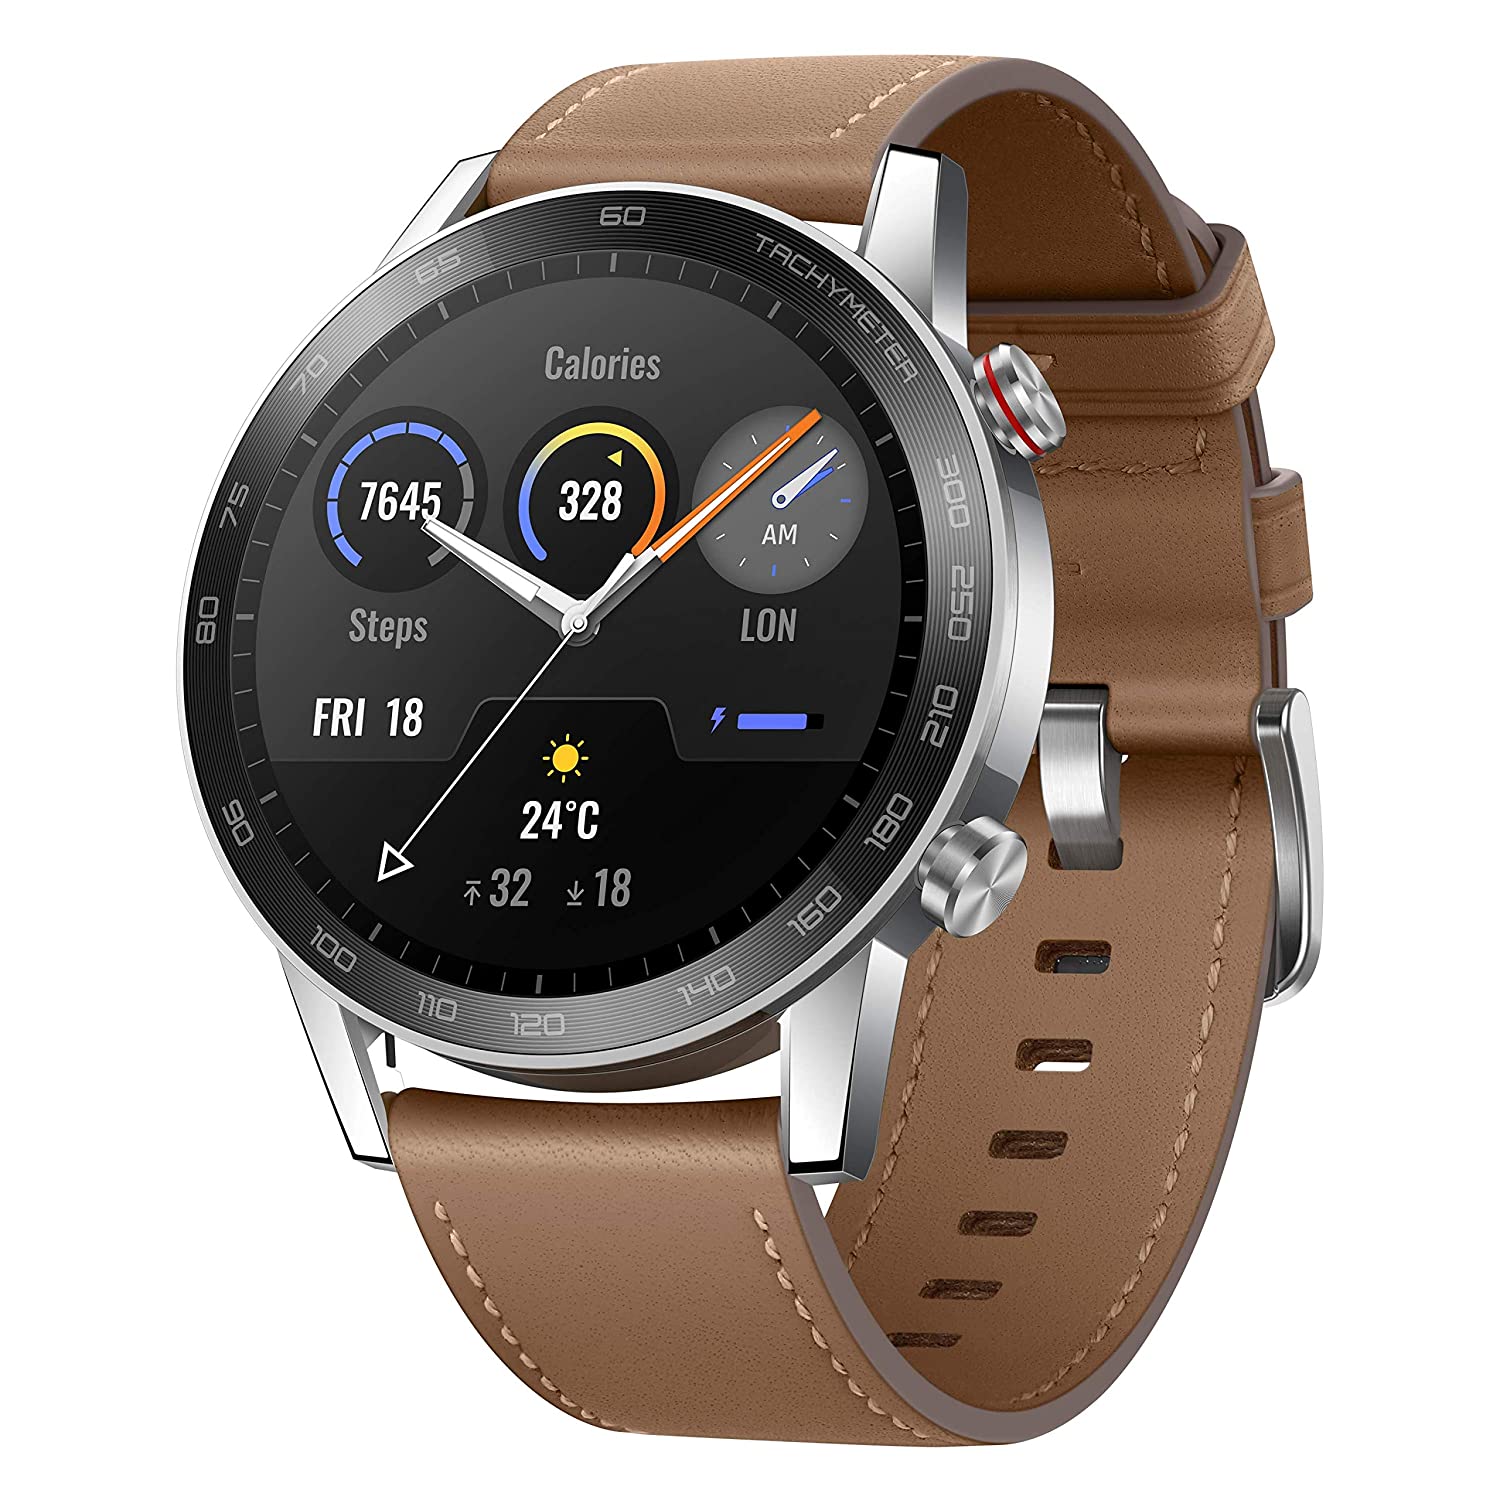 HONOR Magic Watch 2 46mm, Flax Brown budget smartwatch around 12,000 in India